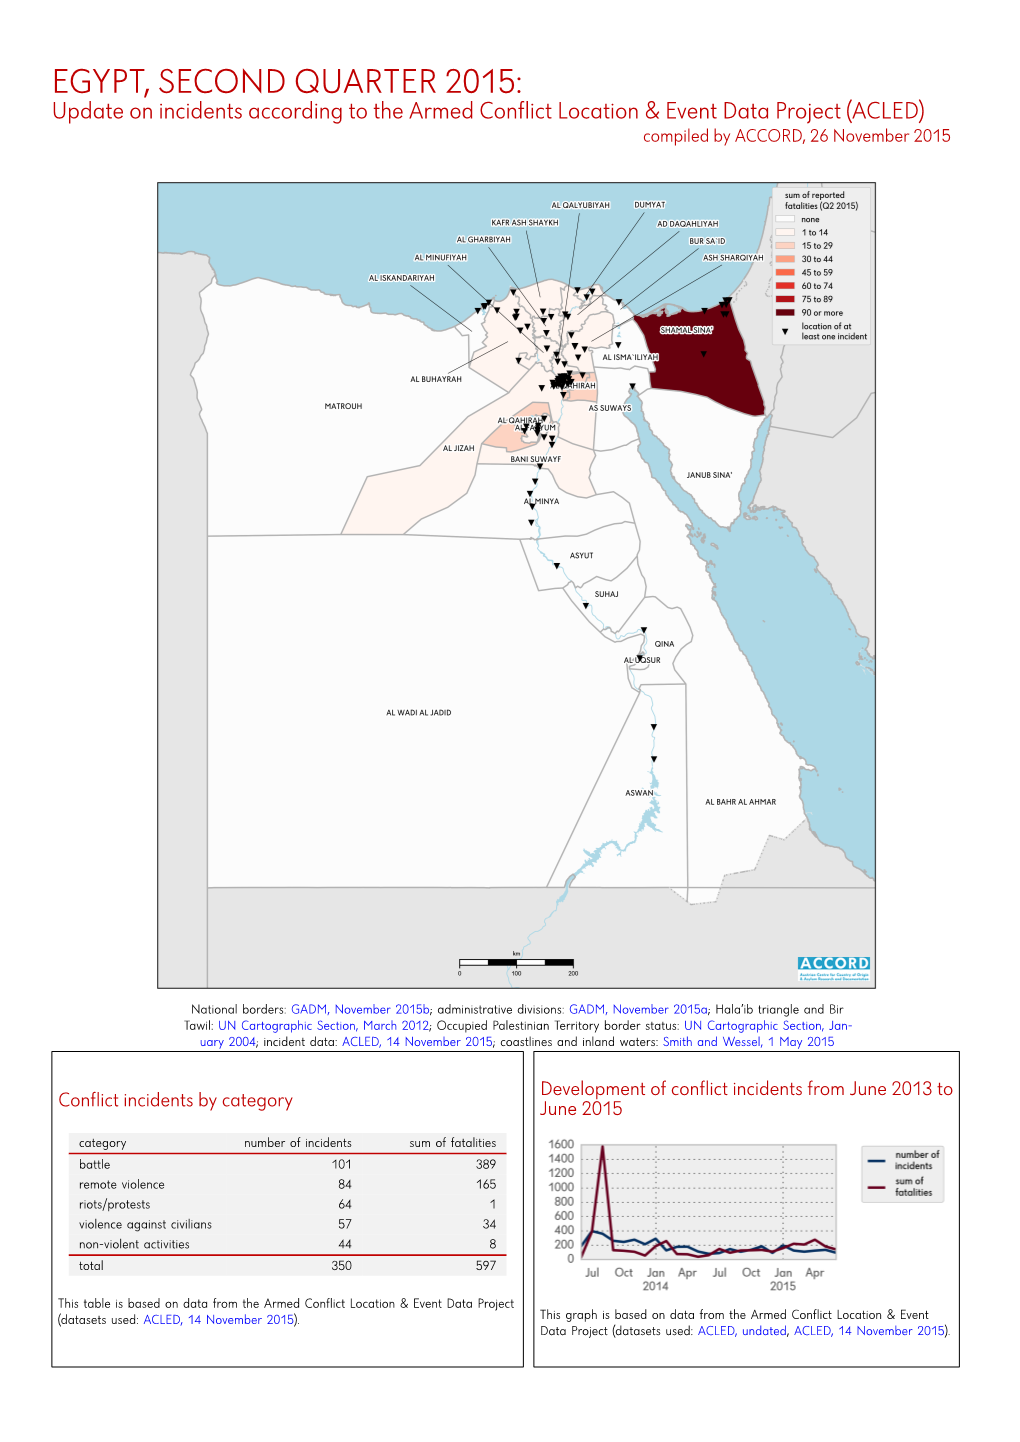 EGYPT, SECOND QUARTER 2015: Update on Incidents According to the Armed Conflict Location & Event Data Project (ACLED) Compiled by ACCORD, 26 November 2015